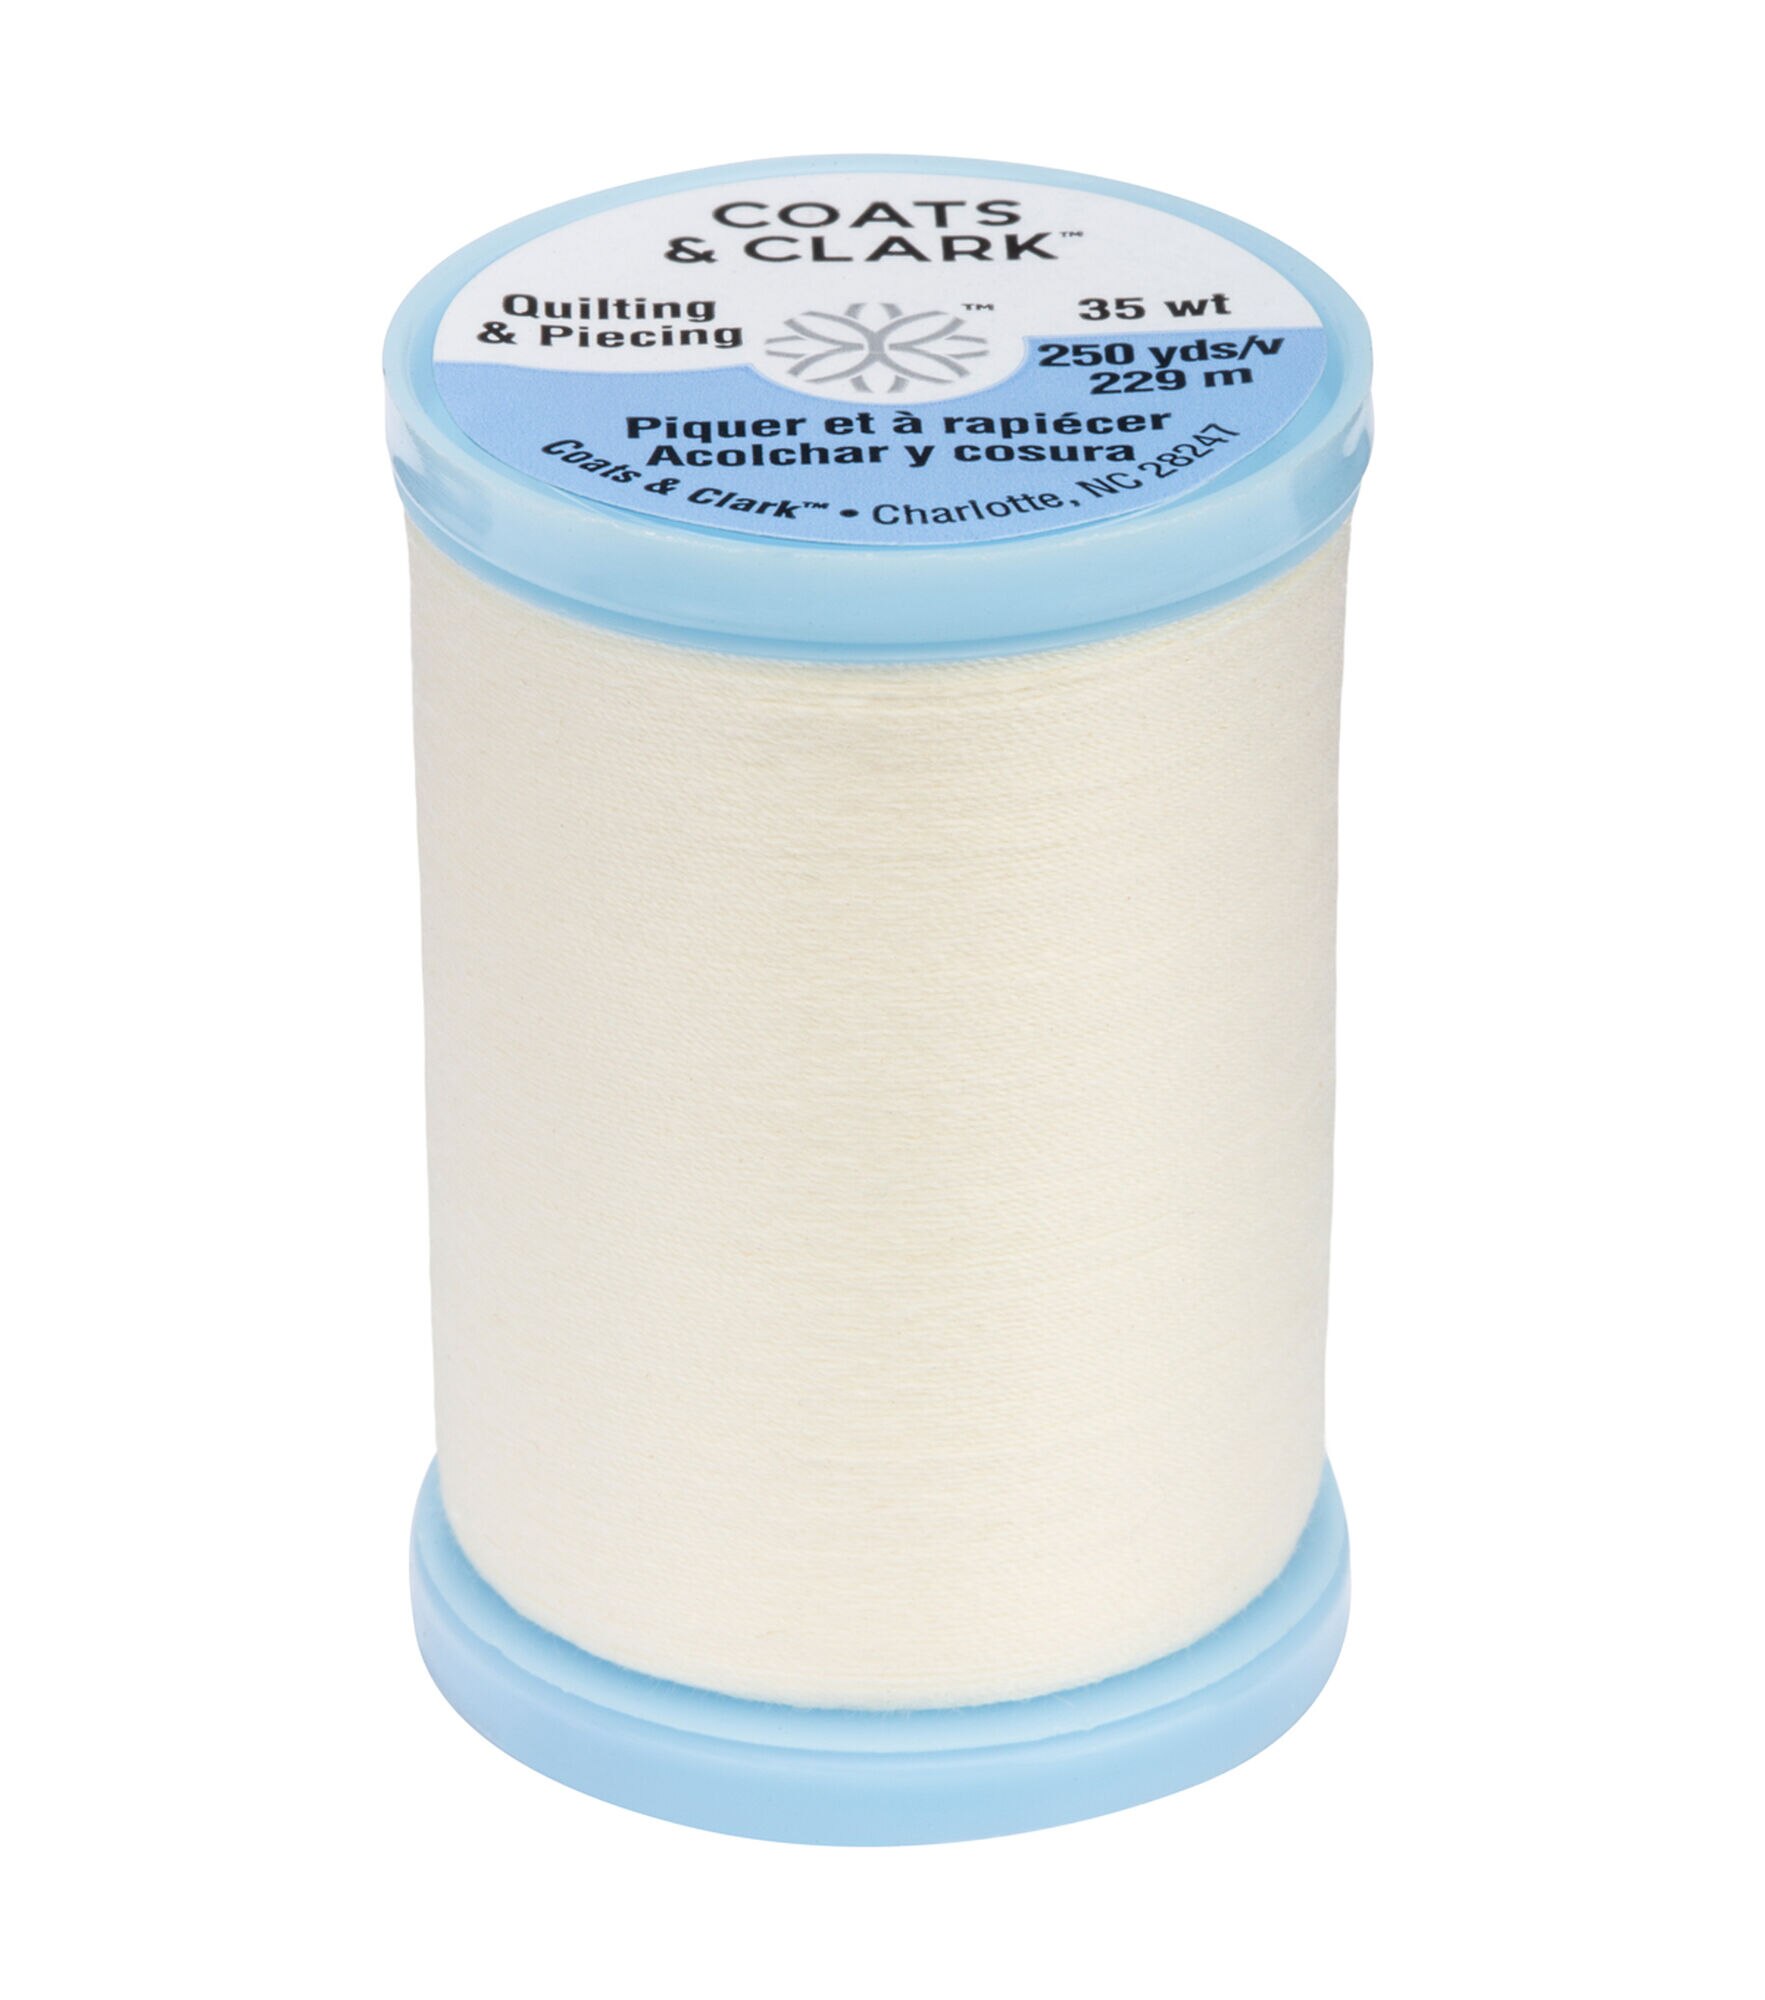 Coats & Clark 250yd 35wt Covered Quilting & Piecing Cotton Thread, 8000 Pearl, hi-res